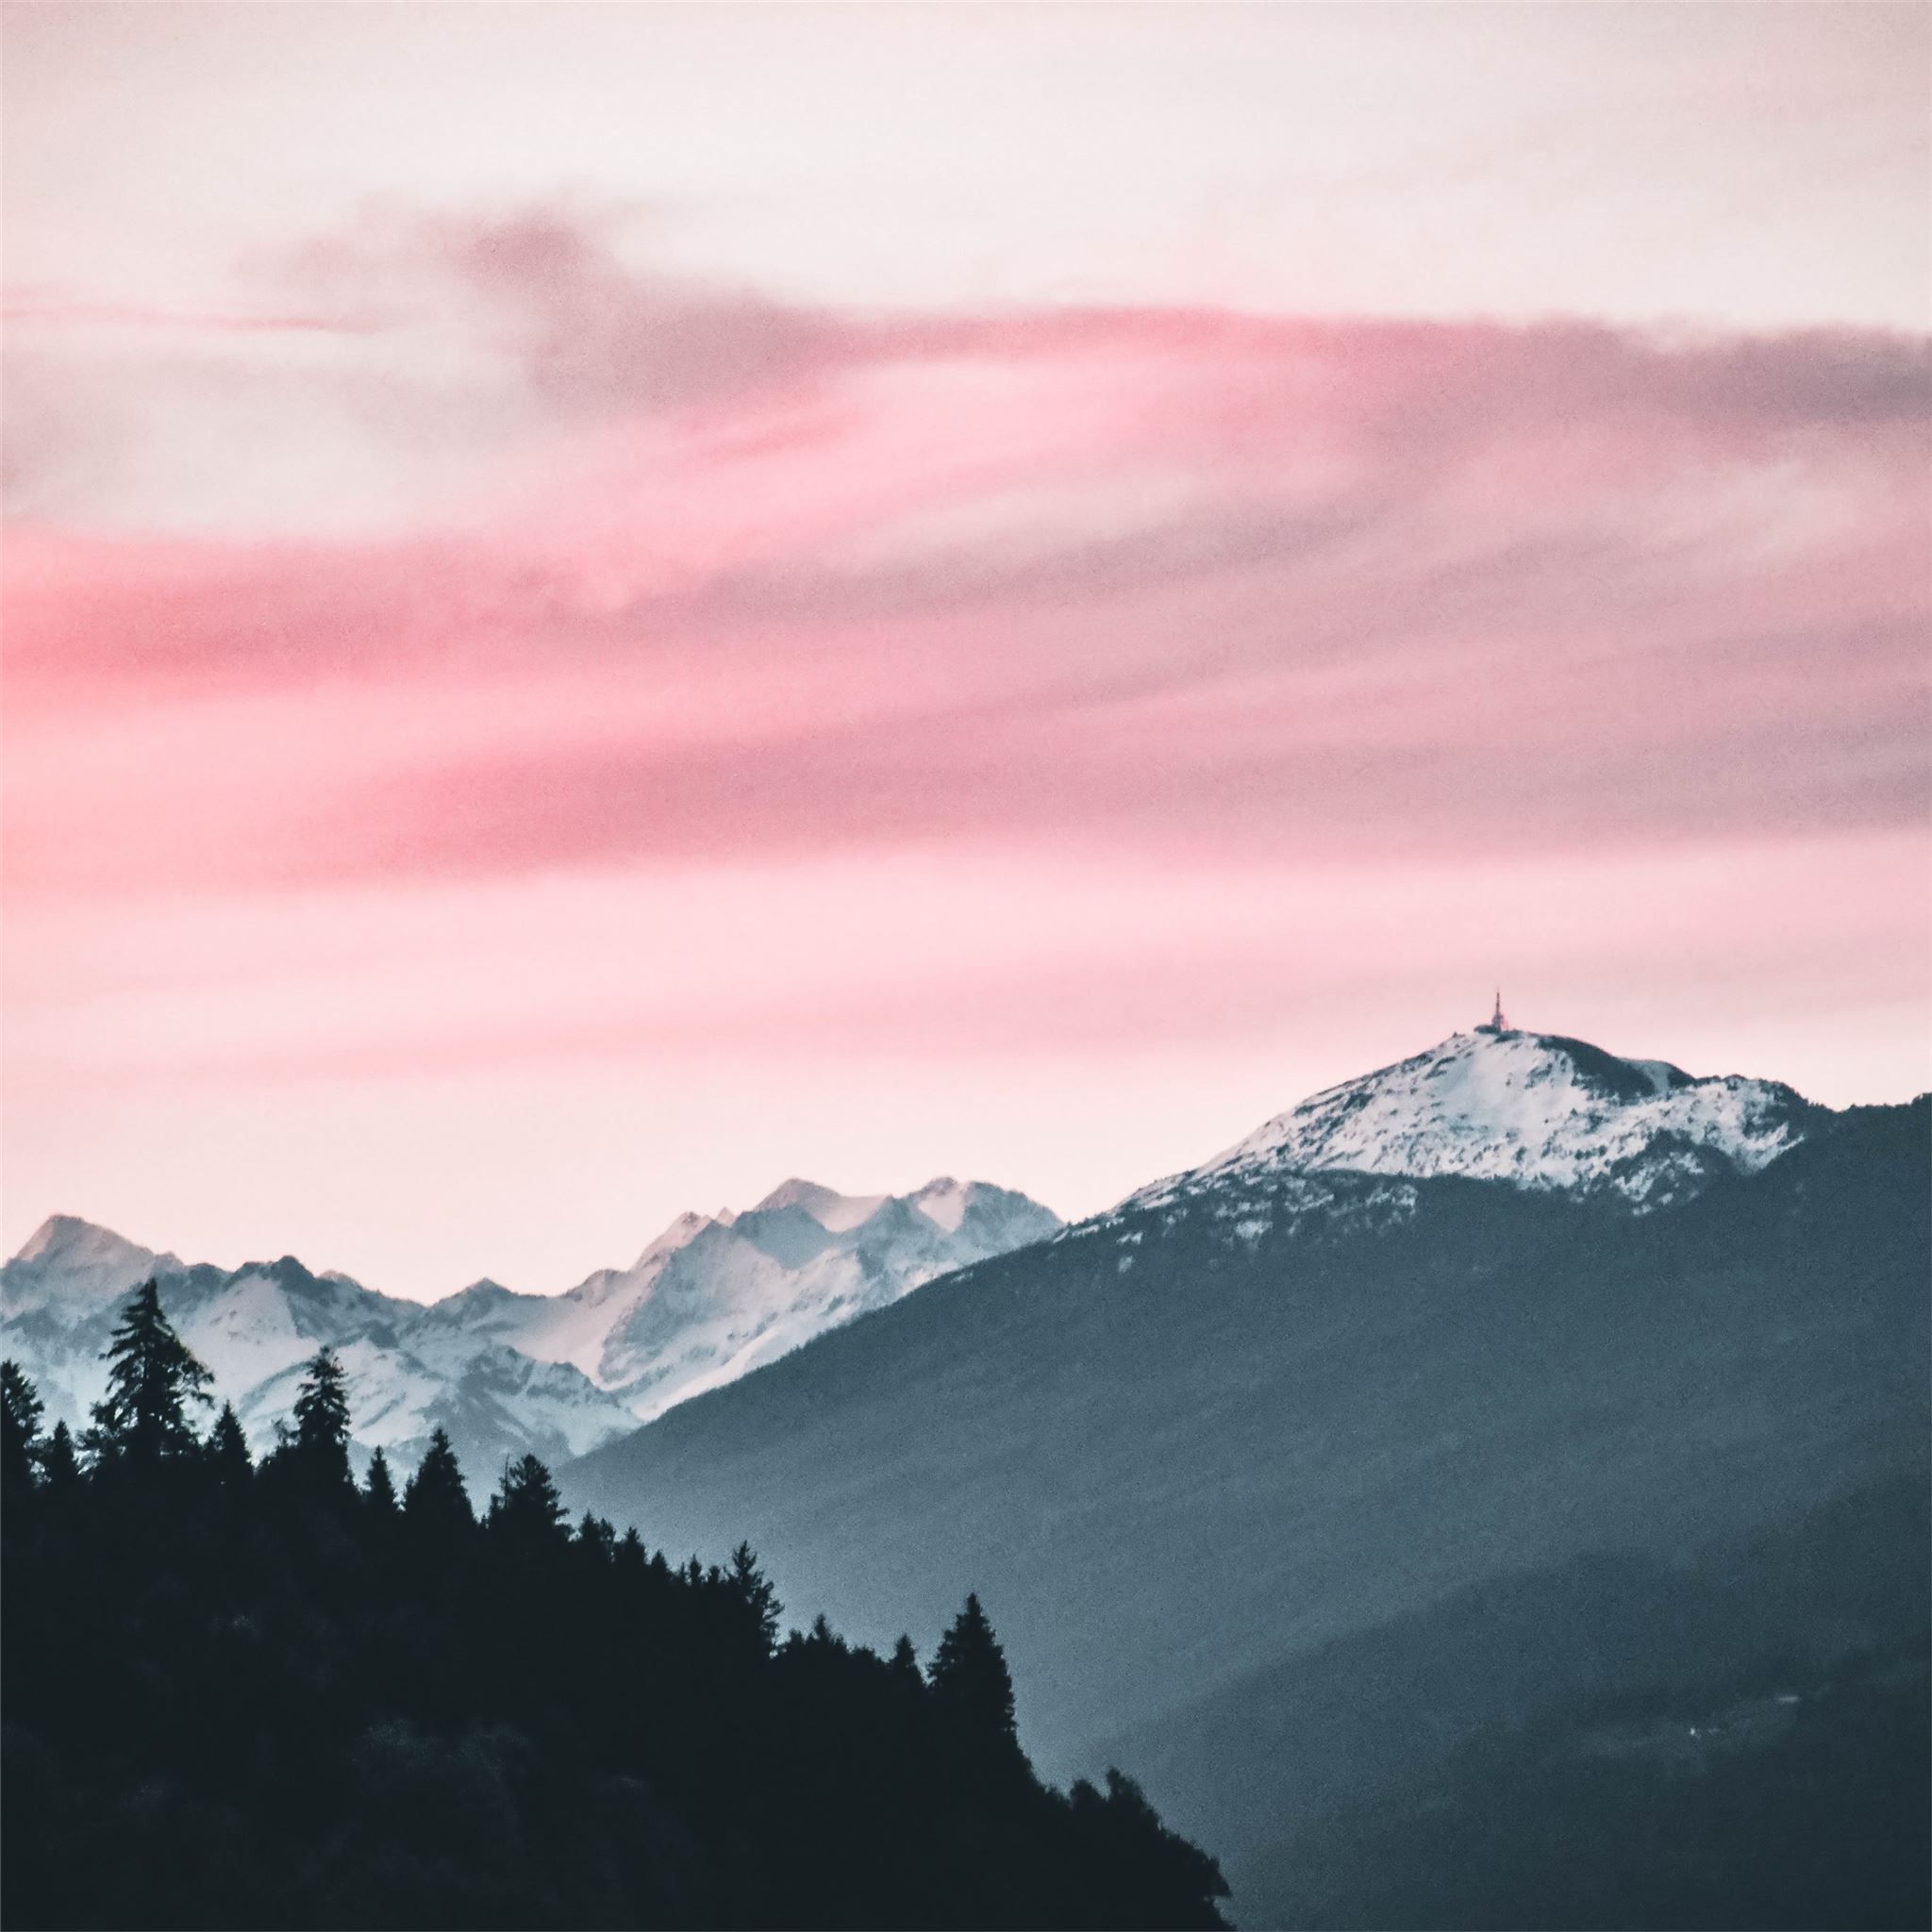 Pastel Aesthetic Mountain Wallpapers